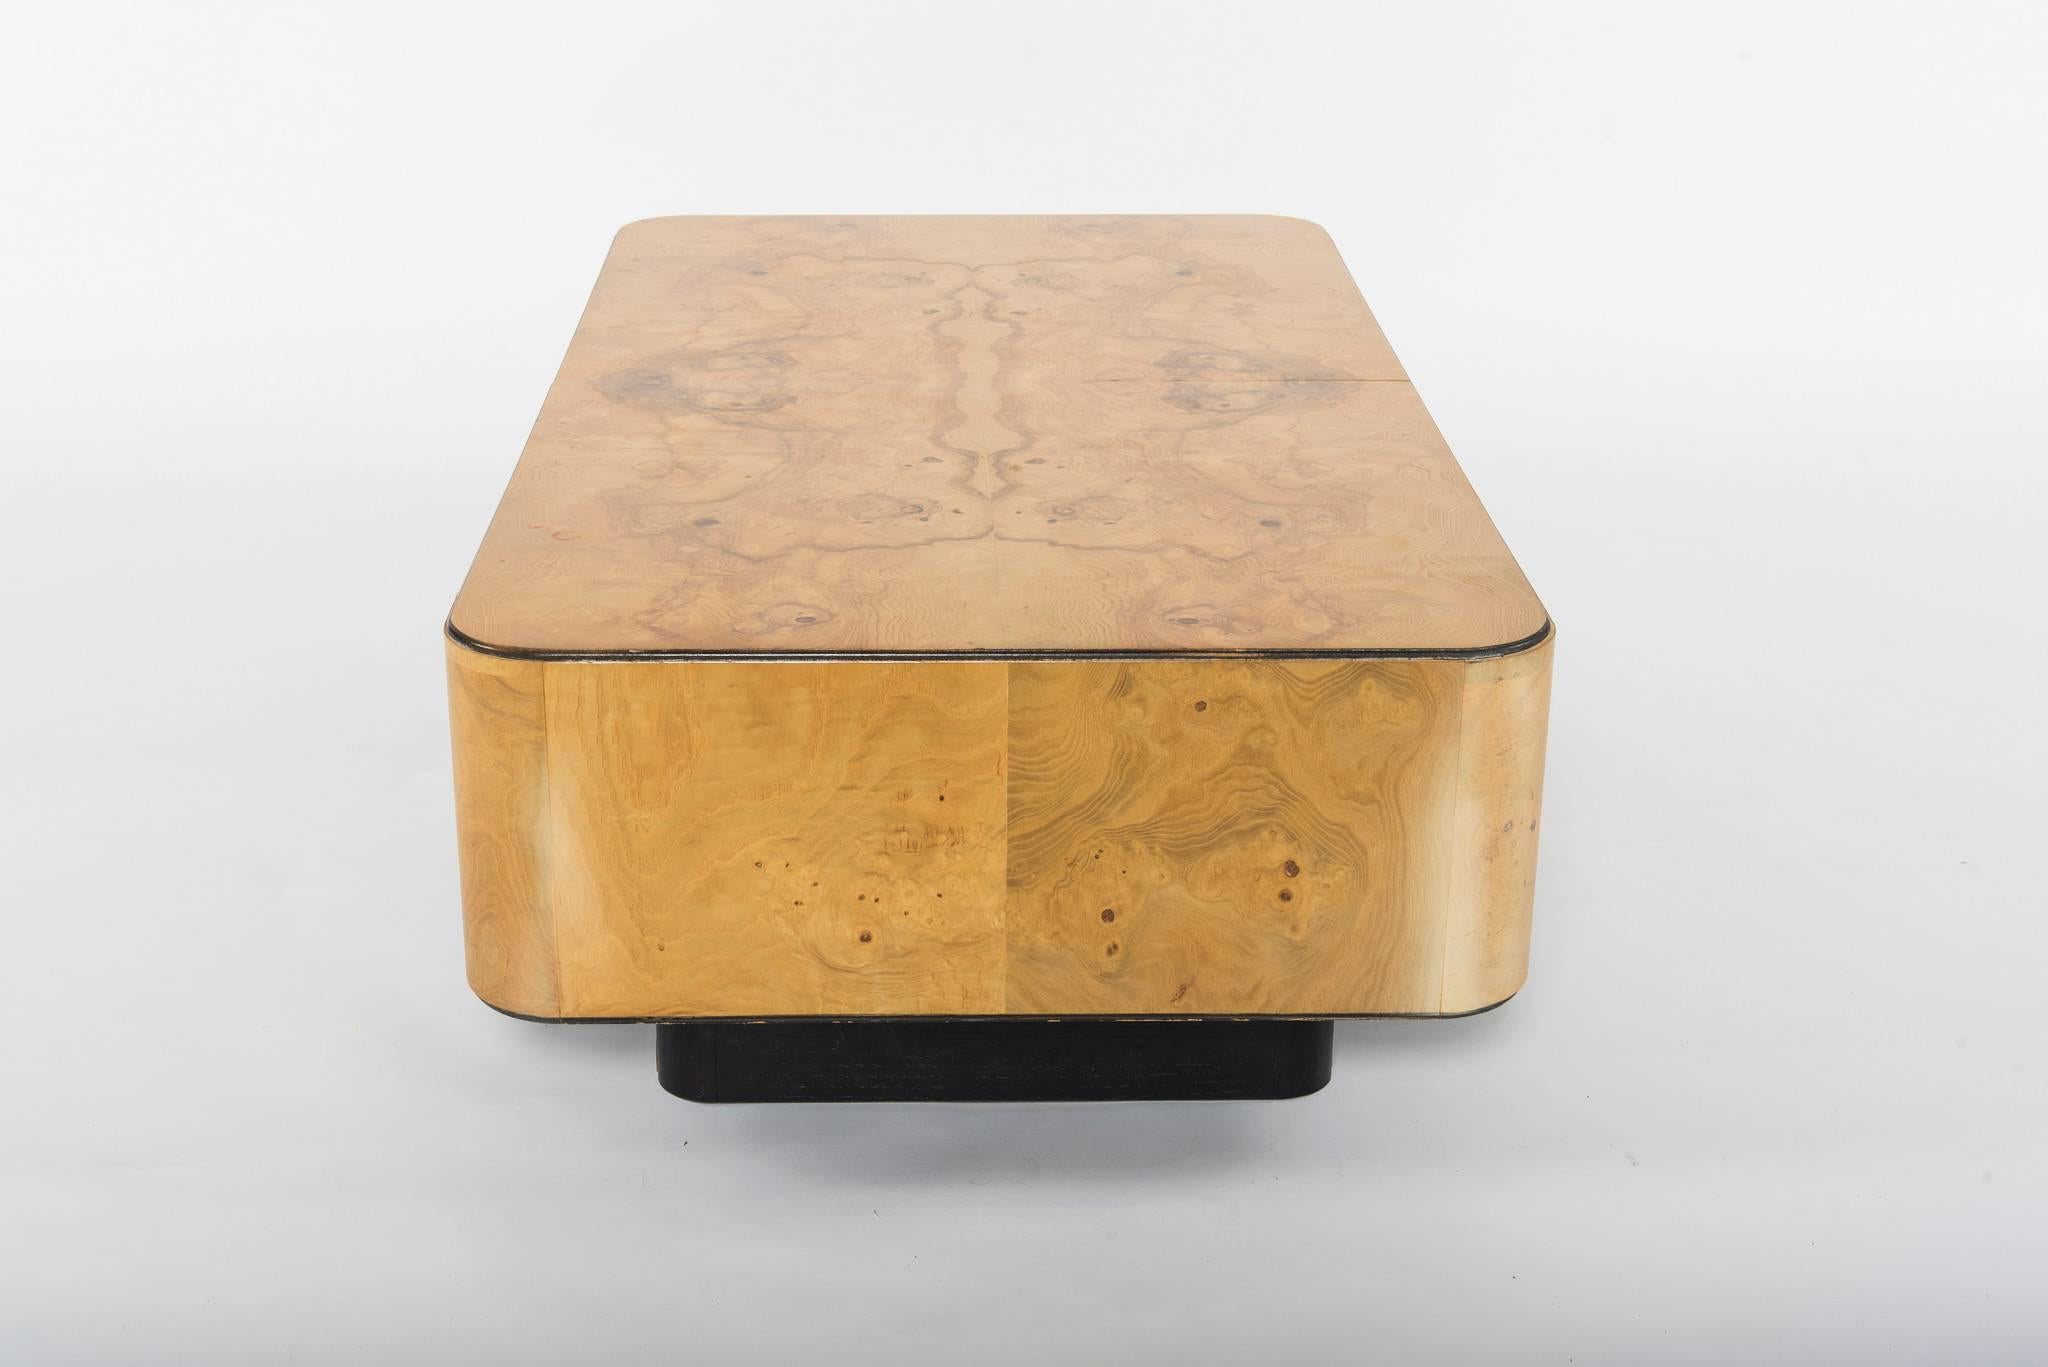 A handsome John Widdicomb burl wood cocktail table with black base. This great piece has a beautiful match booked top with hidden storage area that can even house a bar.